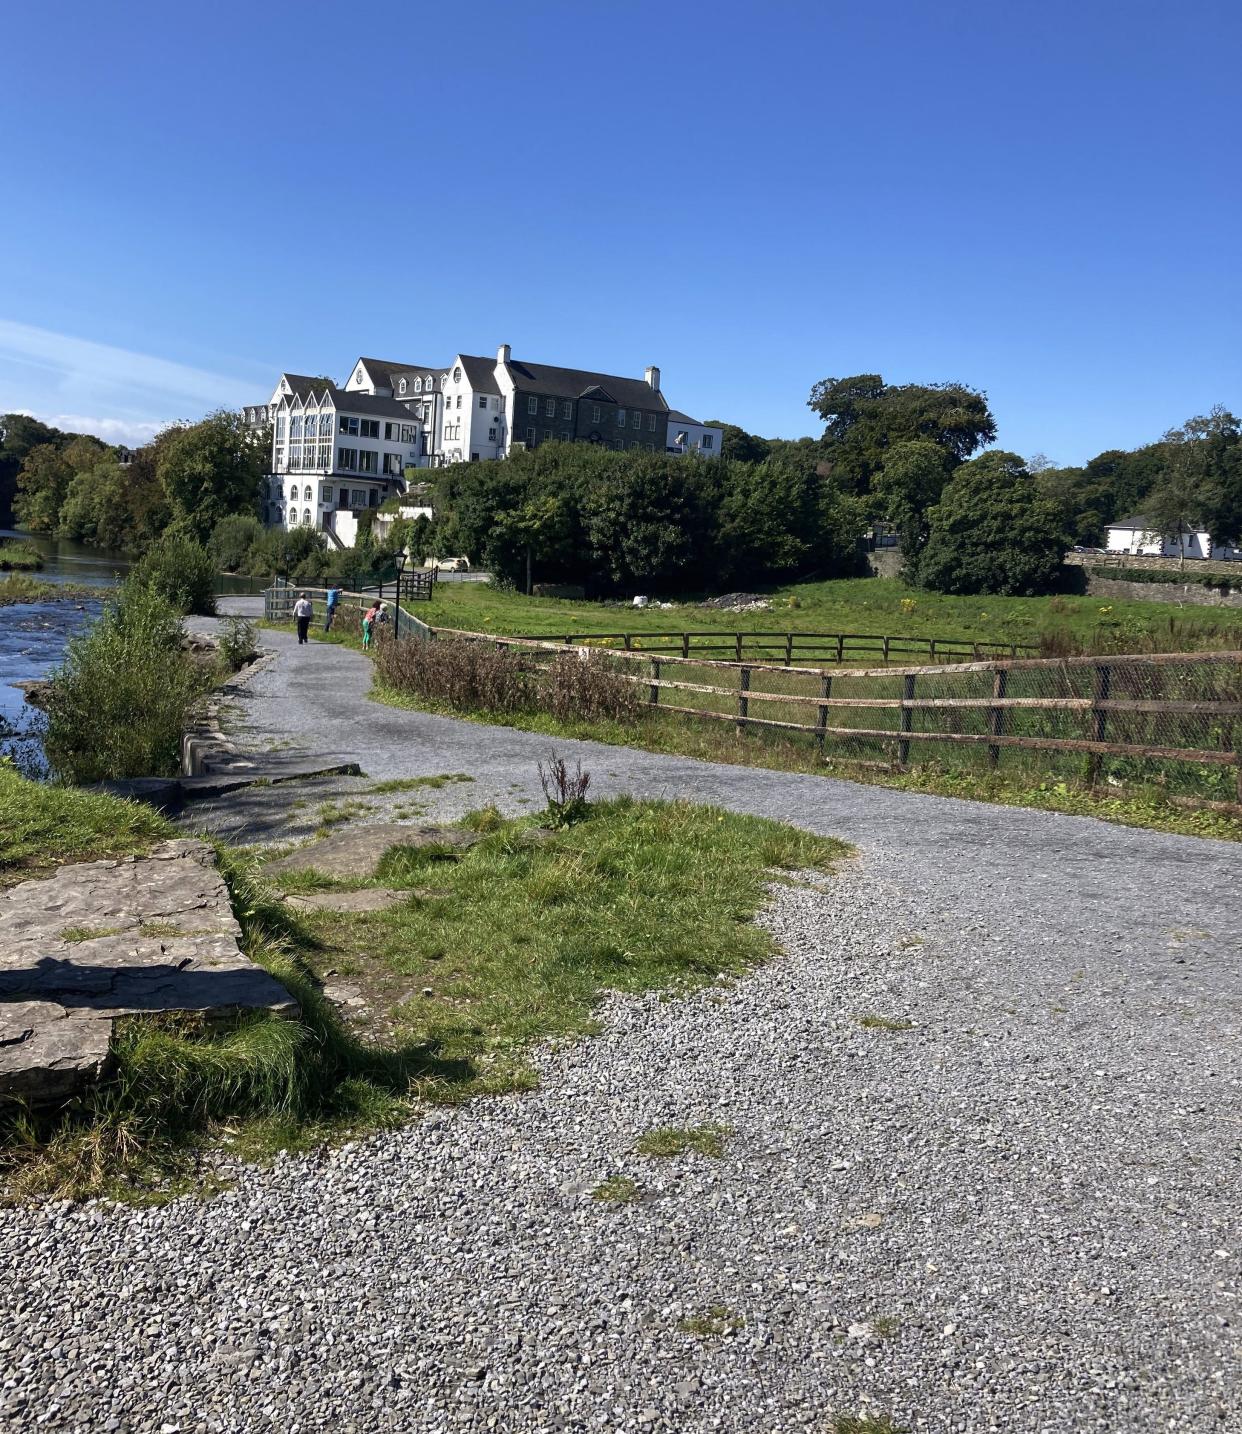 The Falls Hotel occupies 50 acres beside the Inagh River, which provides power for the hotel with its waterfall. Local residents often join tourists in strolling the grounds of the hotel.